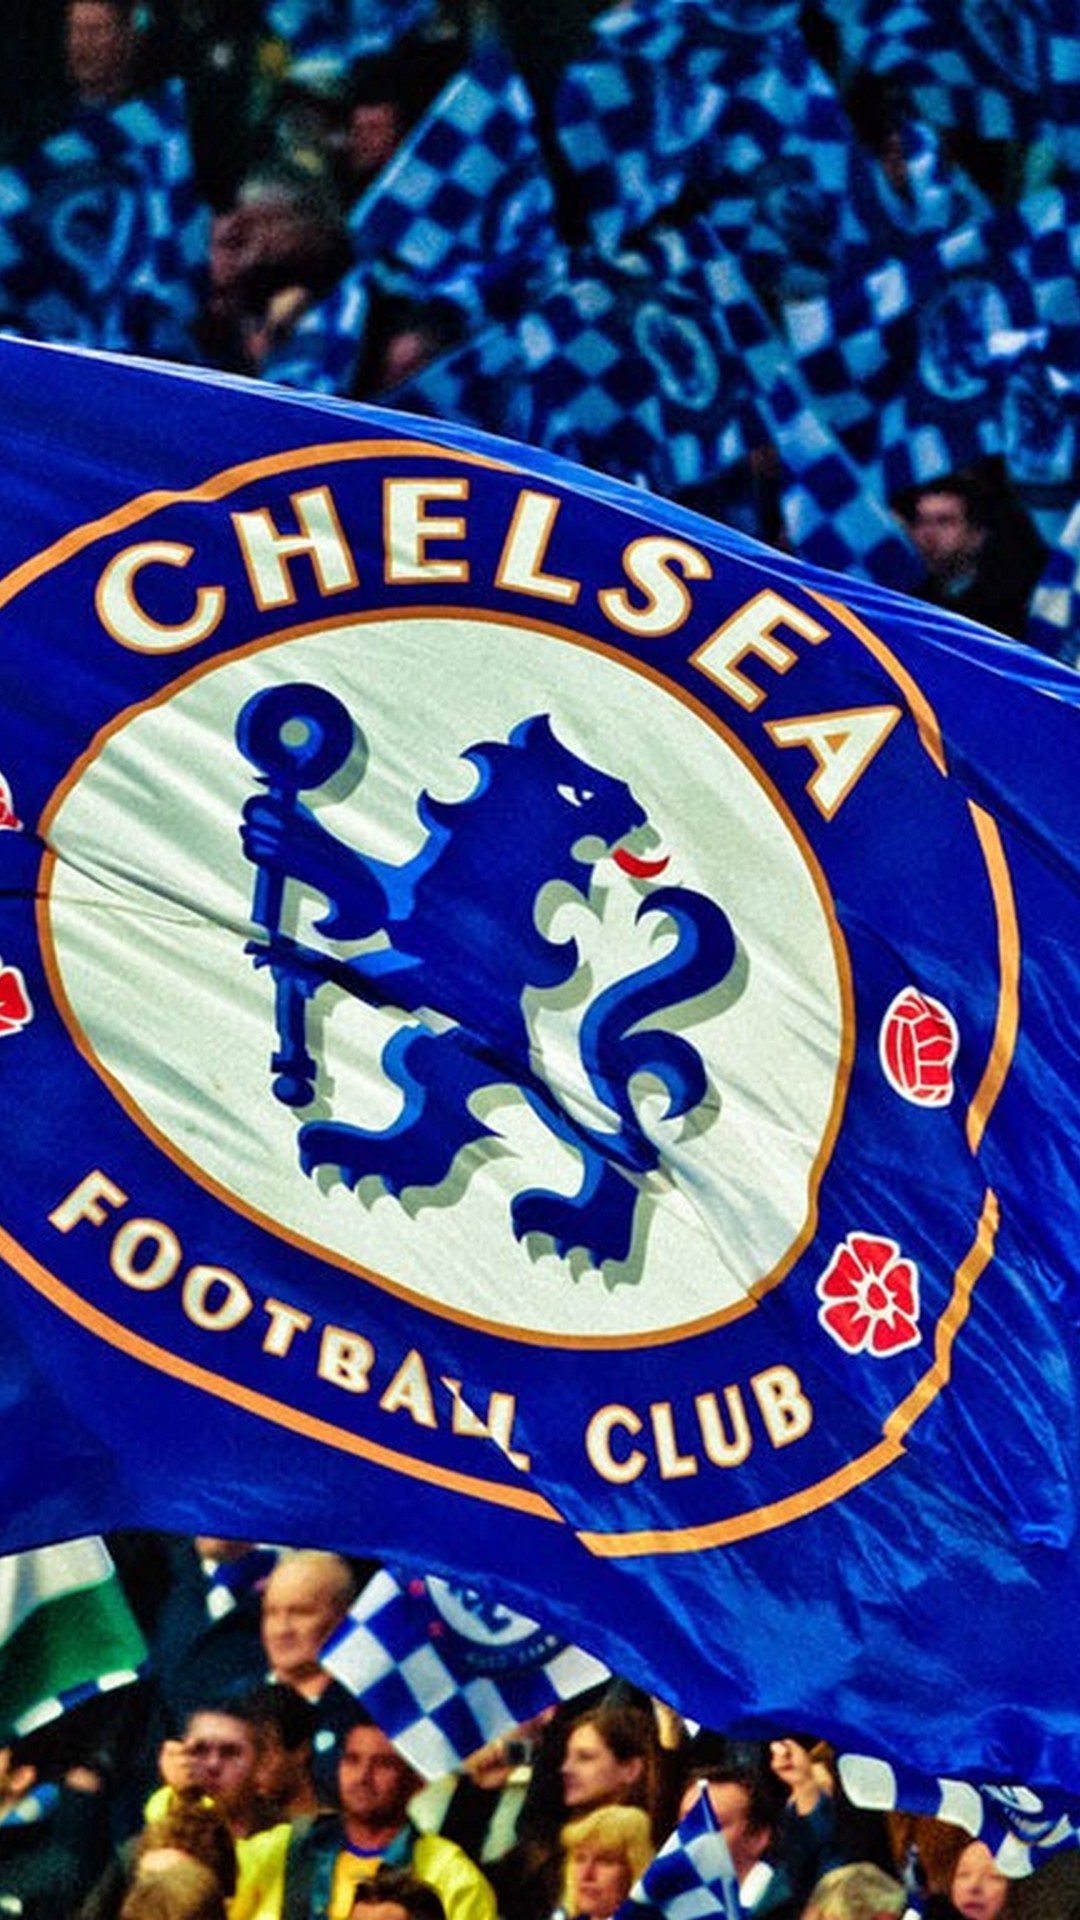 Wallpaper Chelsea Champions League iPhone With Resolution 1080X1920 pixel. You can make this wallpaper for your Mac or Windows Desktop Background, iPhone, Android or Tablet and another Smartphone device for free